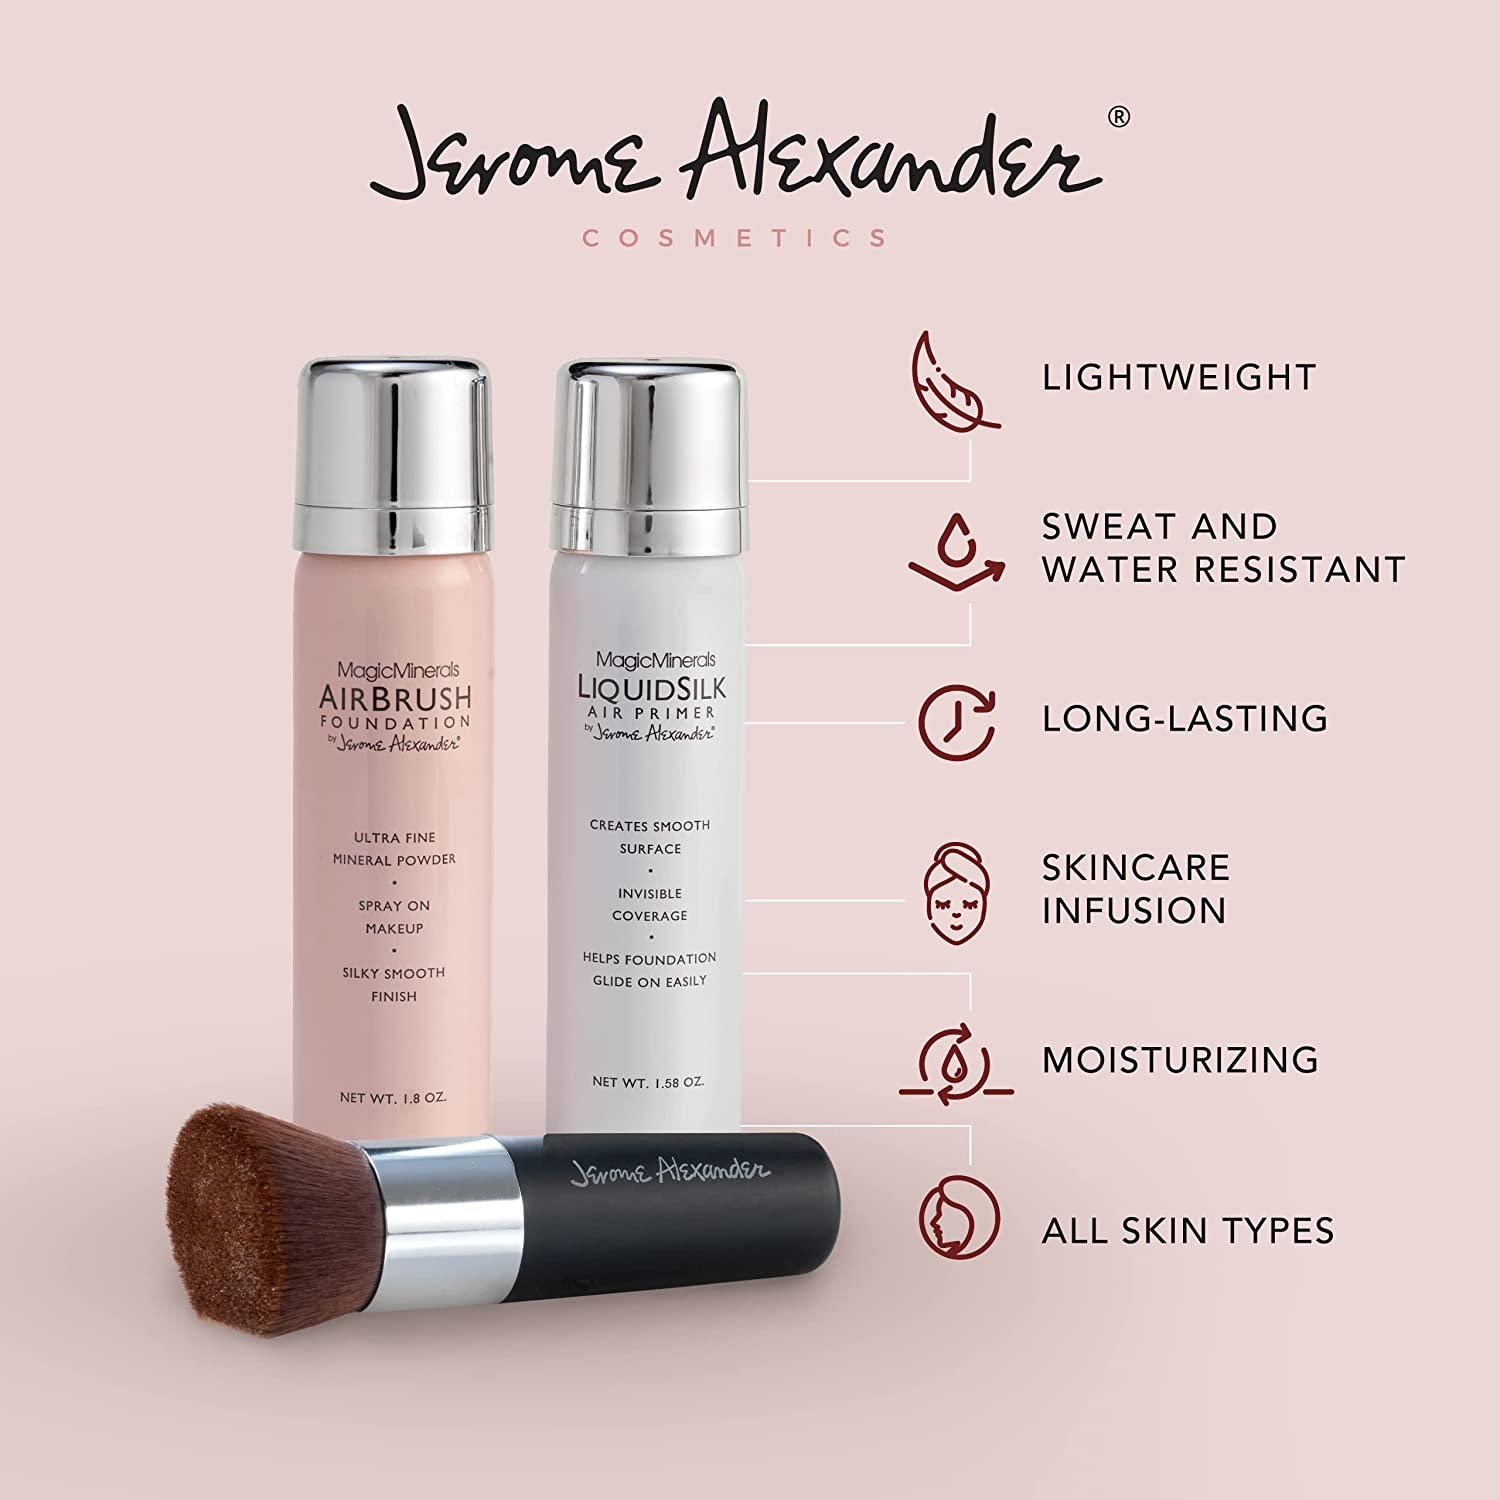 MagicMinerals AirBrush Foundation by Jerome Alexander – 3pc Spray Makeup  Set with Anti-aging Ingredients for Smooth Radiant Skin (3 Piece Set,  Bright Medium)